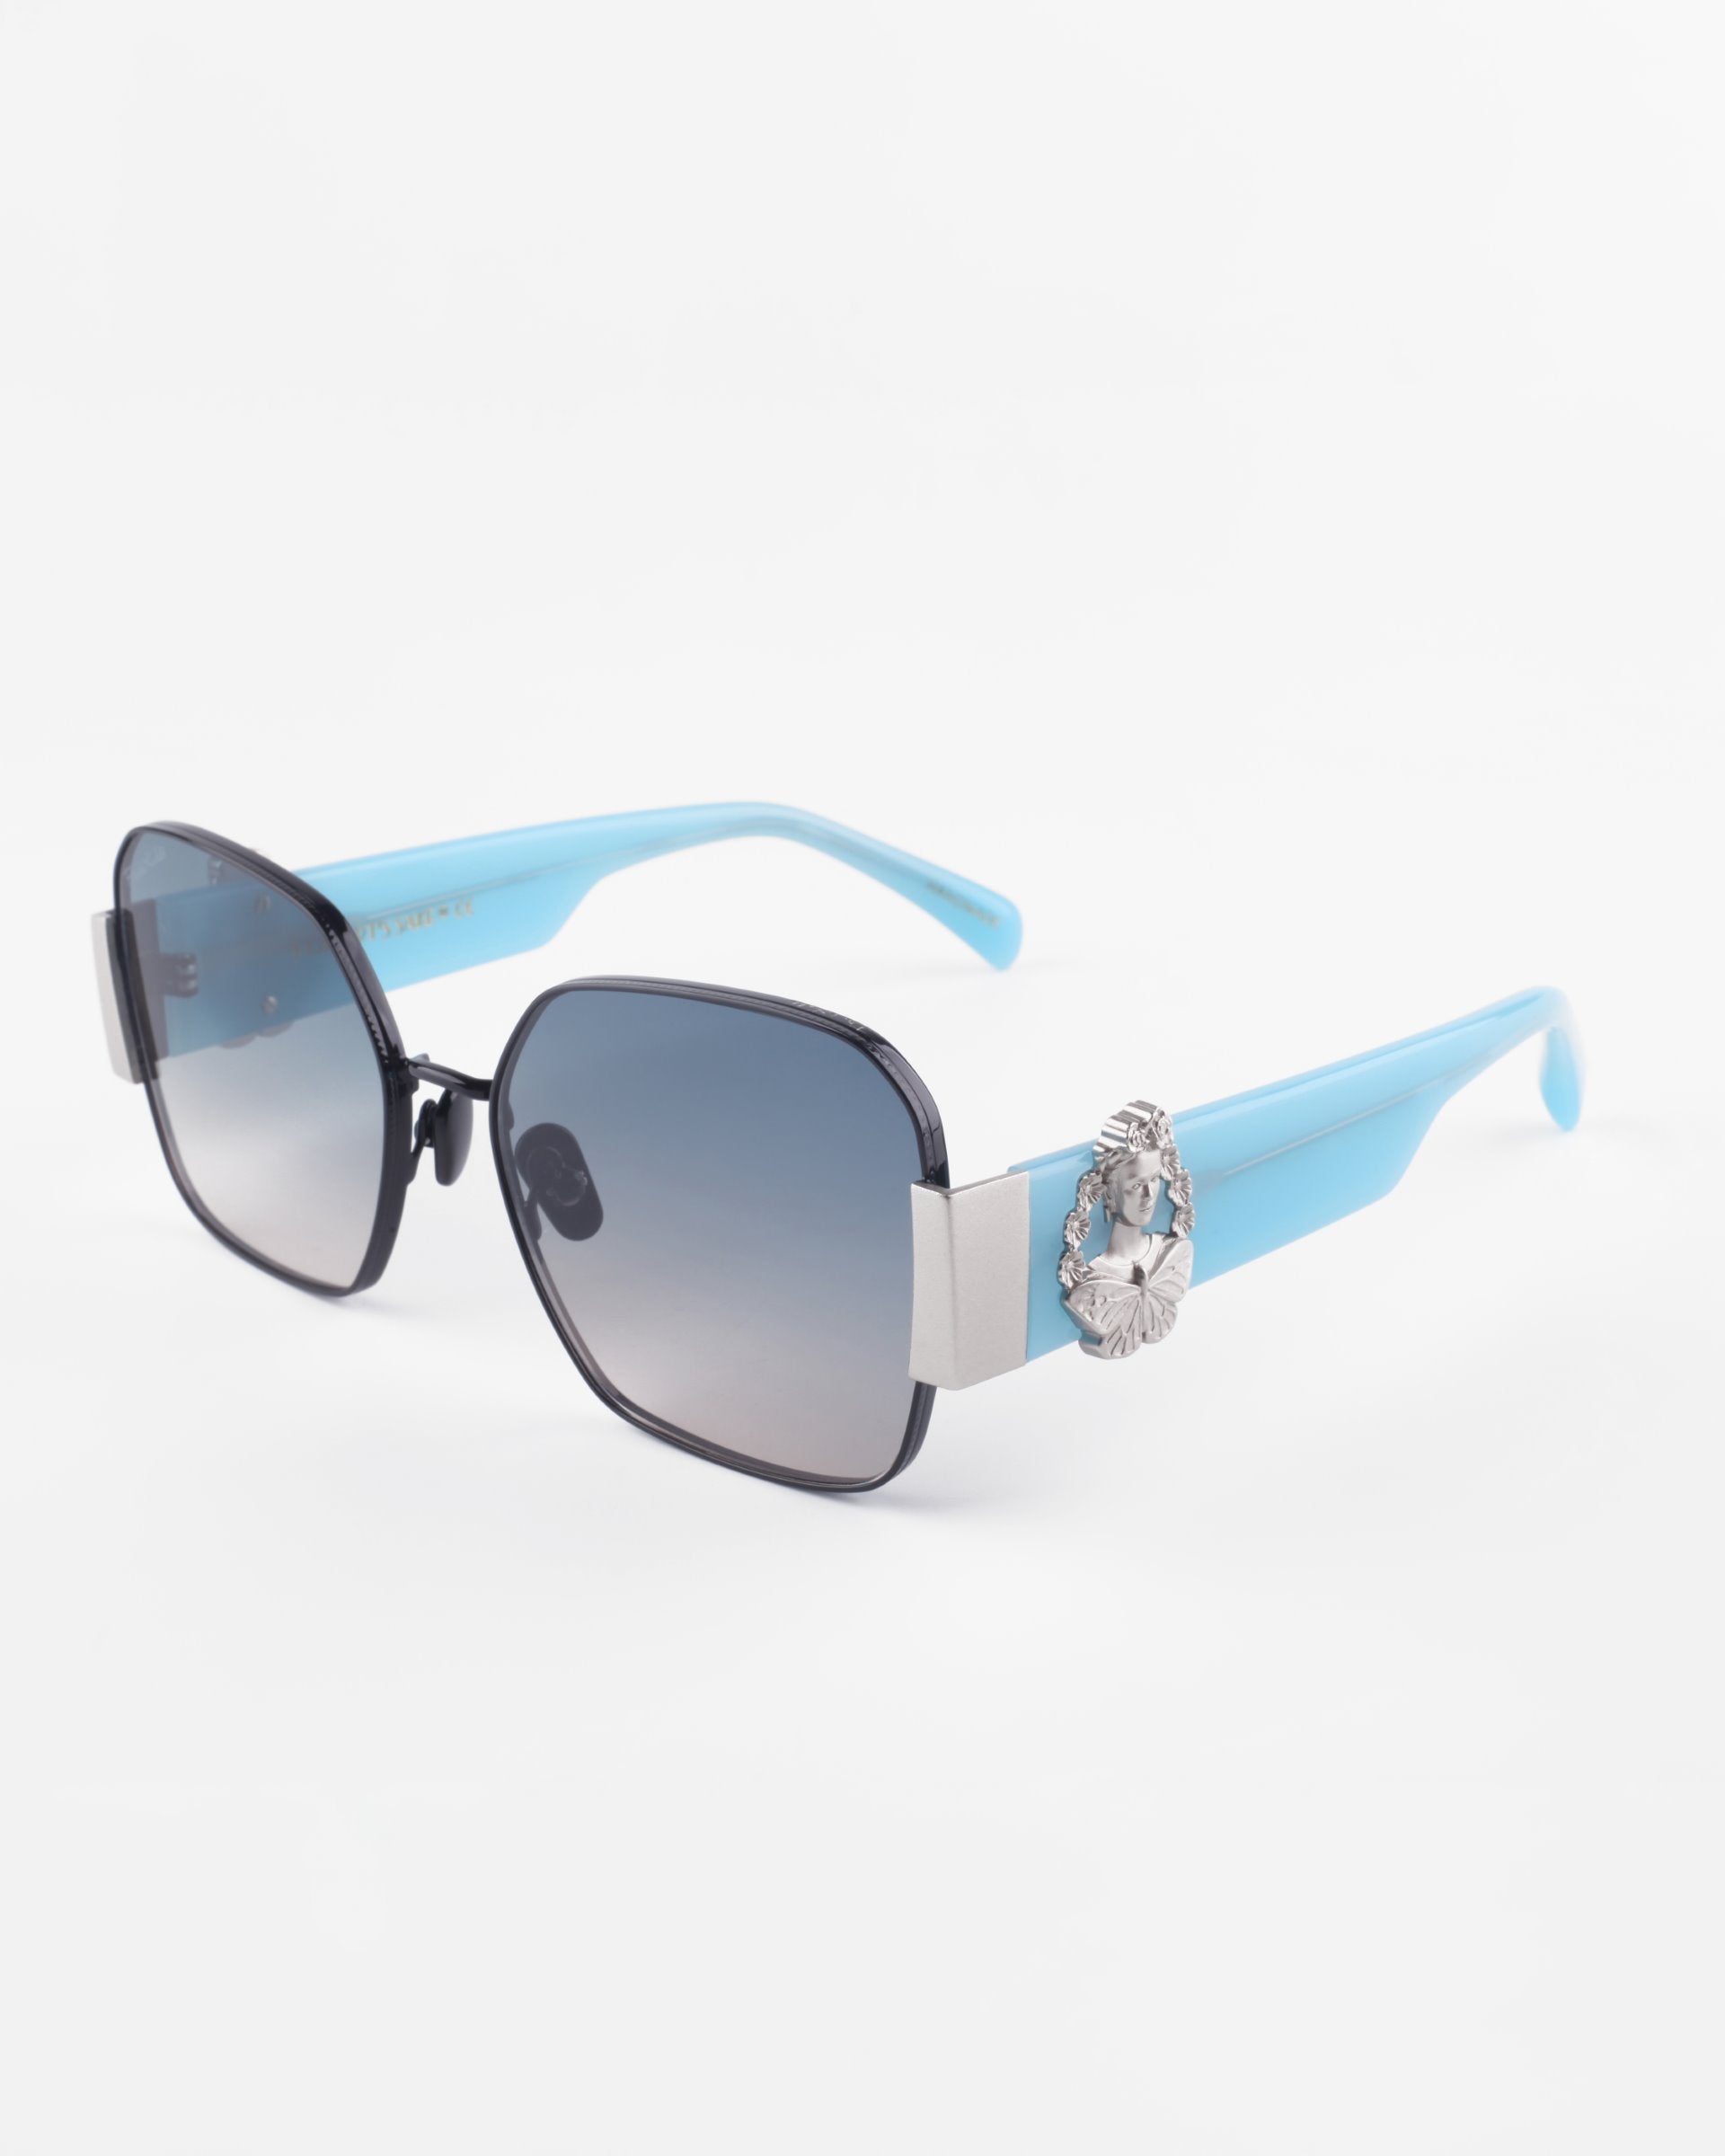 Introducing the Frida Mask by For Art&#39;s Sake®: A pair of rectangular sunglasses featuring black frames and light blue temples. The temples have a silver decorative element with a circular emblem near the hinge. The ultra-lightweight Nylon lenses offer gradient shading, transitioning from dark at the top to lighter at the bottom, with 100% UVA &amp; UVB protection.